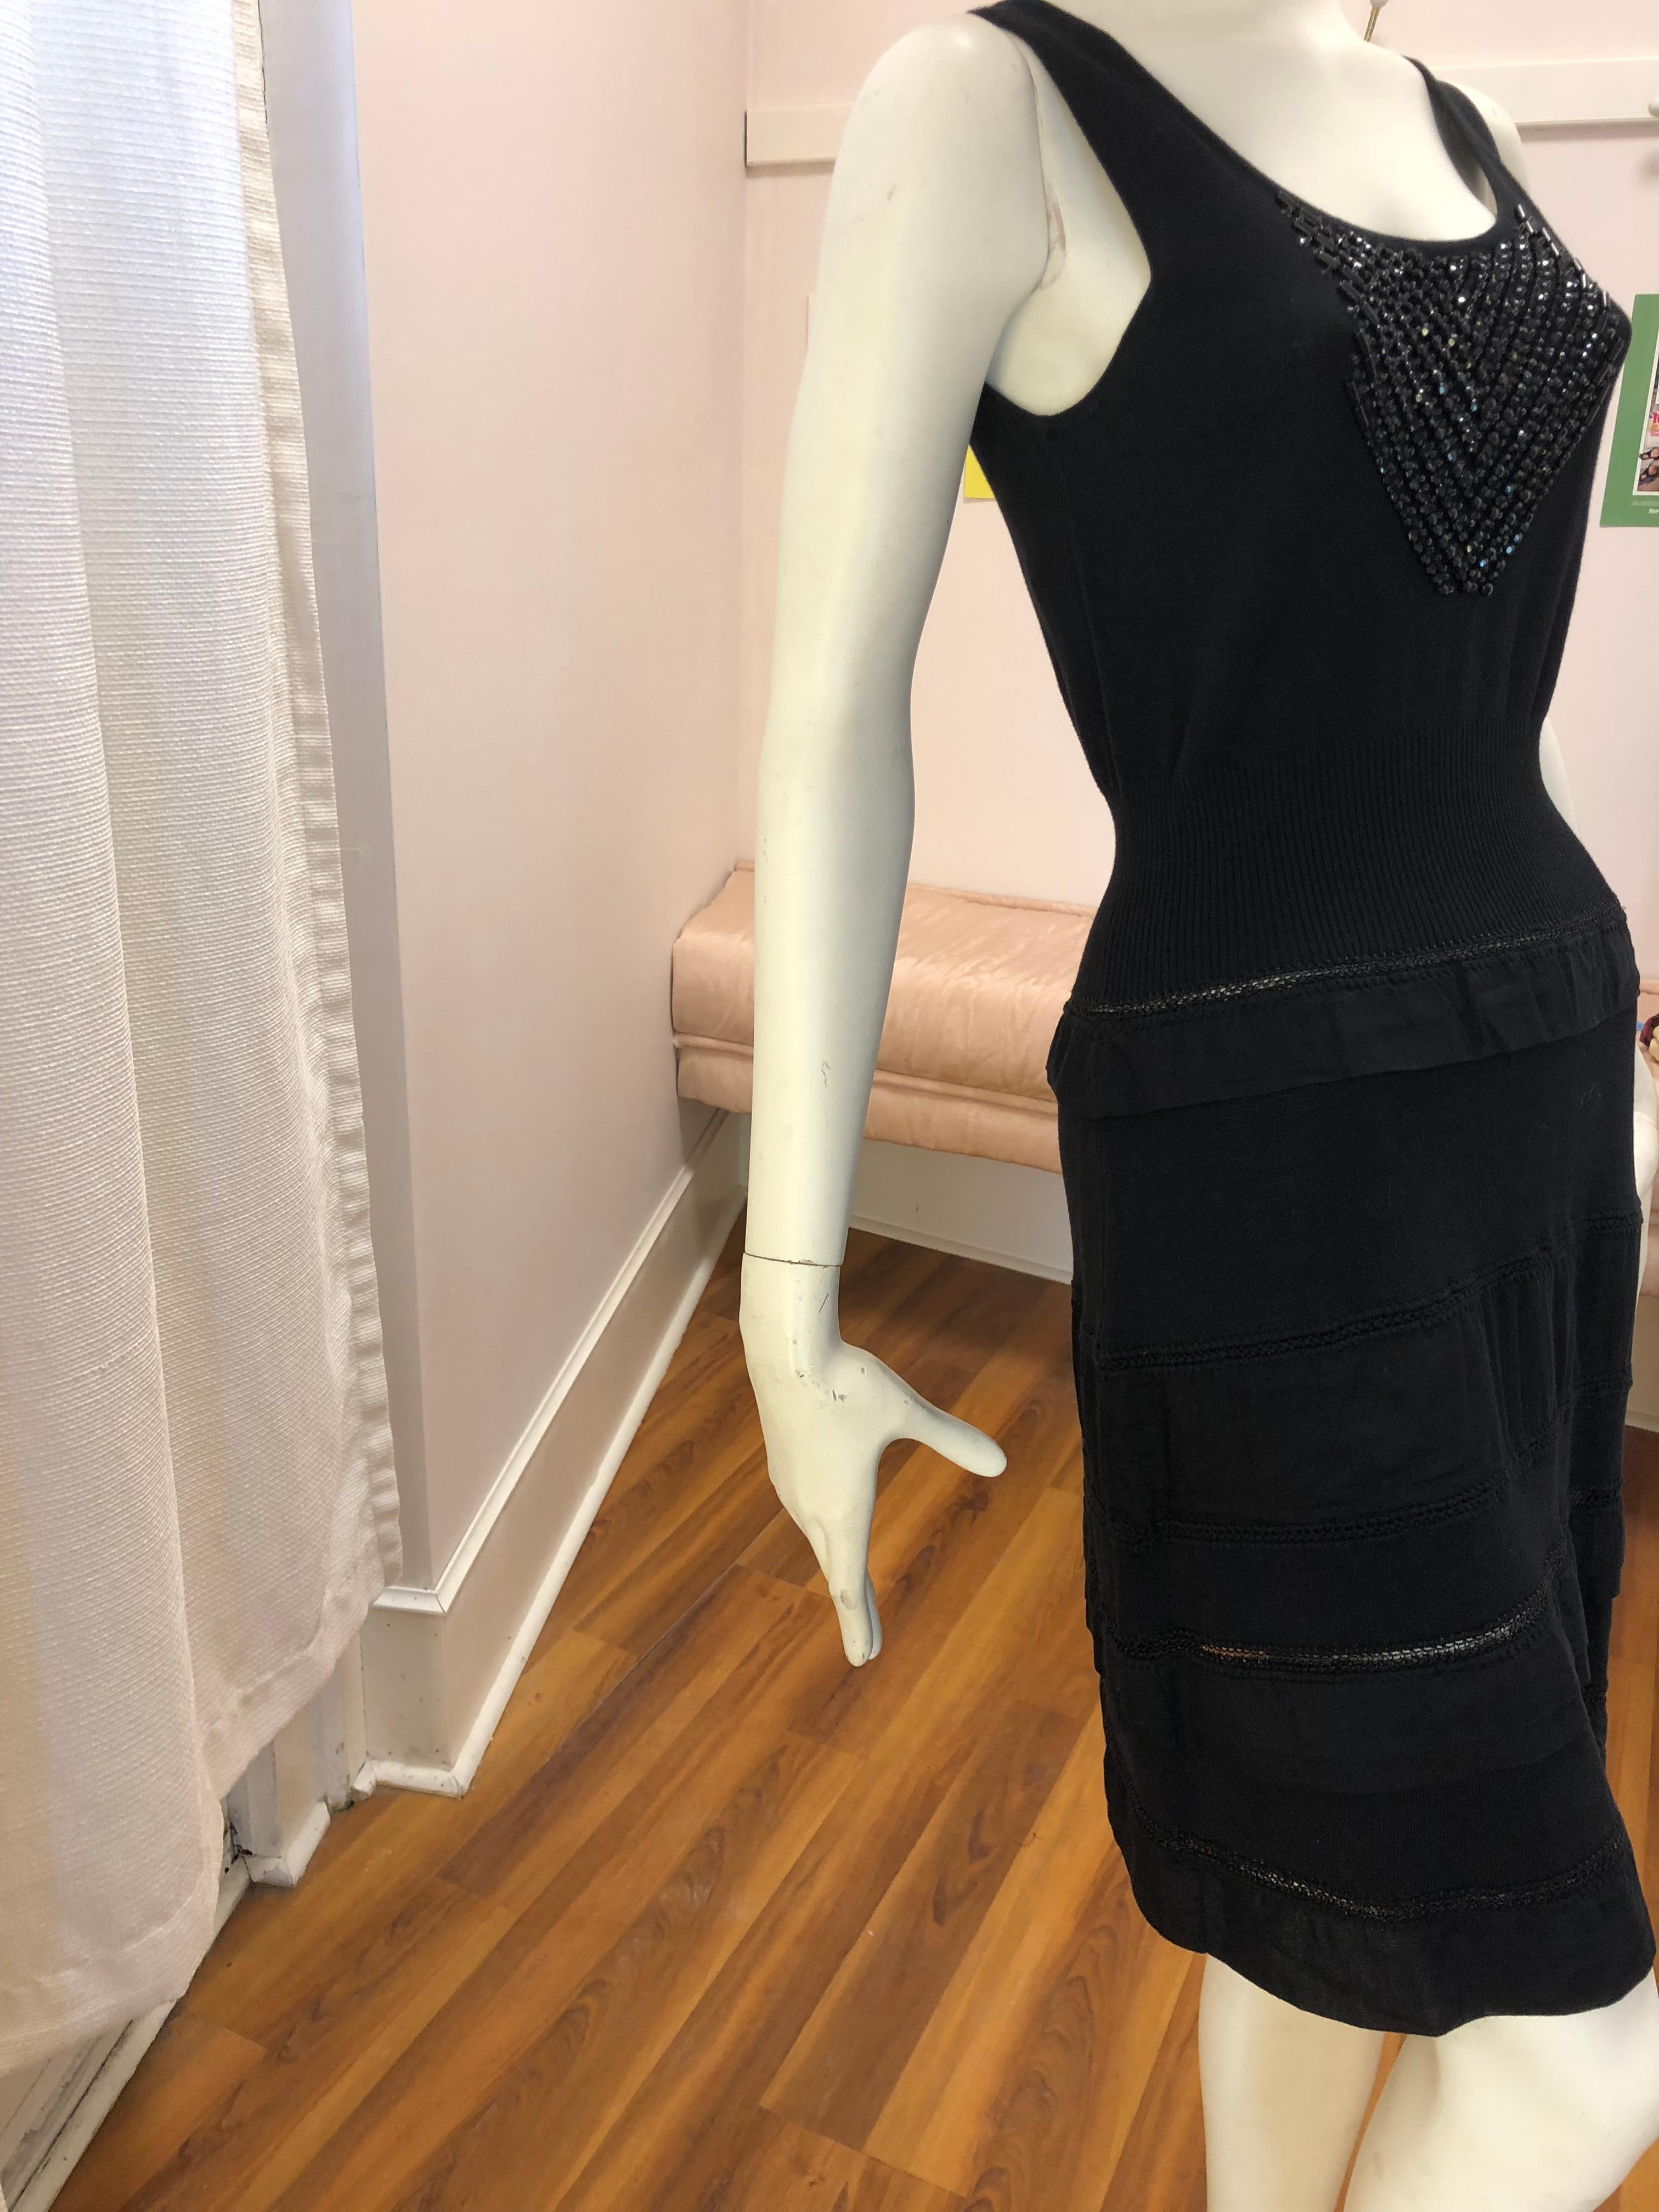 The sleeveless dress has an arrow pattern of black beads on the chest a ribbed expandable waist; three strips of metallic bands as well as a number of flat frills. Would make a great cocktail or evening dinner dress.